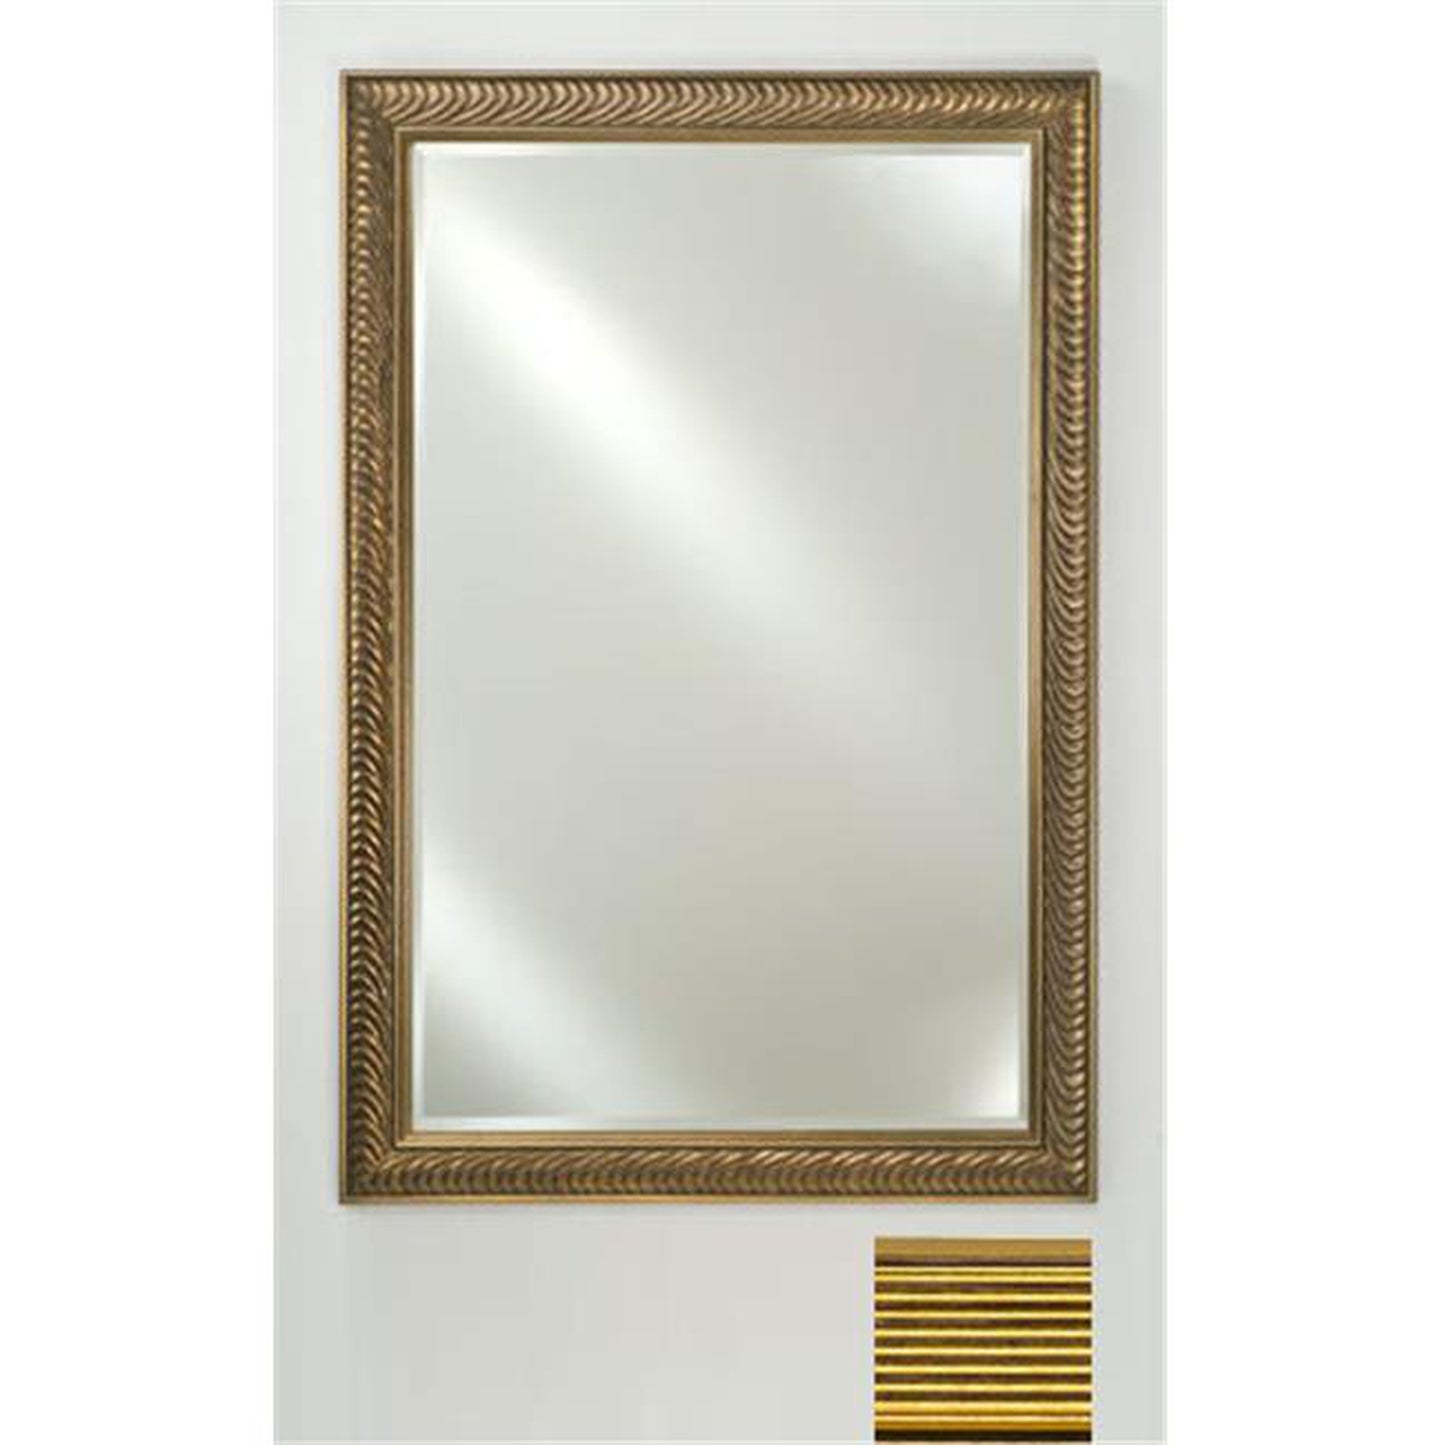 Afina Signature 16" x 22" Meridian Antique Gold With Antique Silver Caps Framed Mirror With Beveled Edge